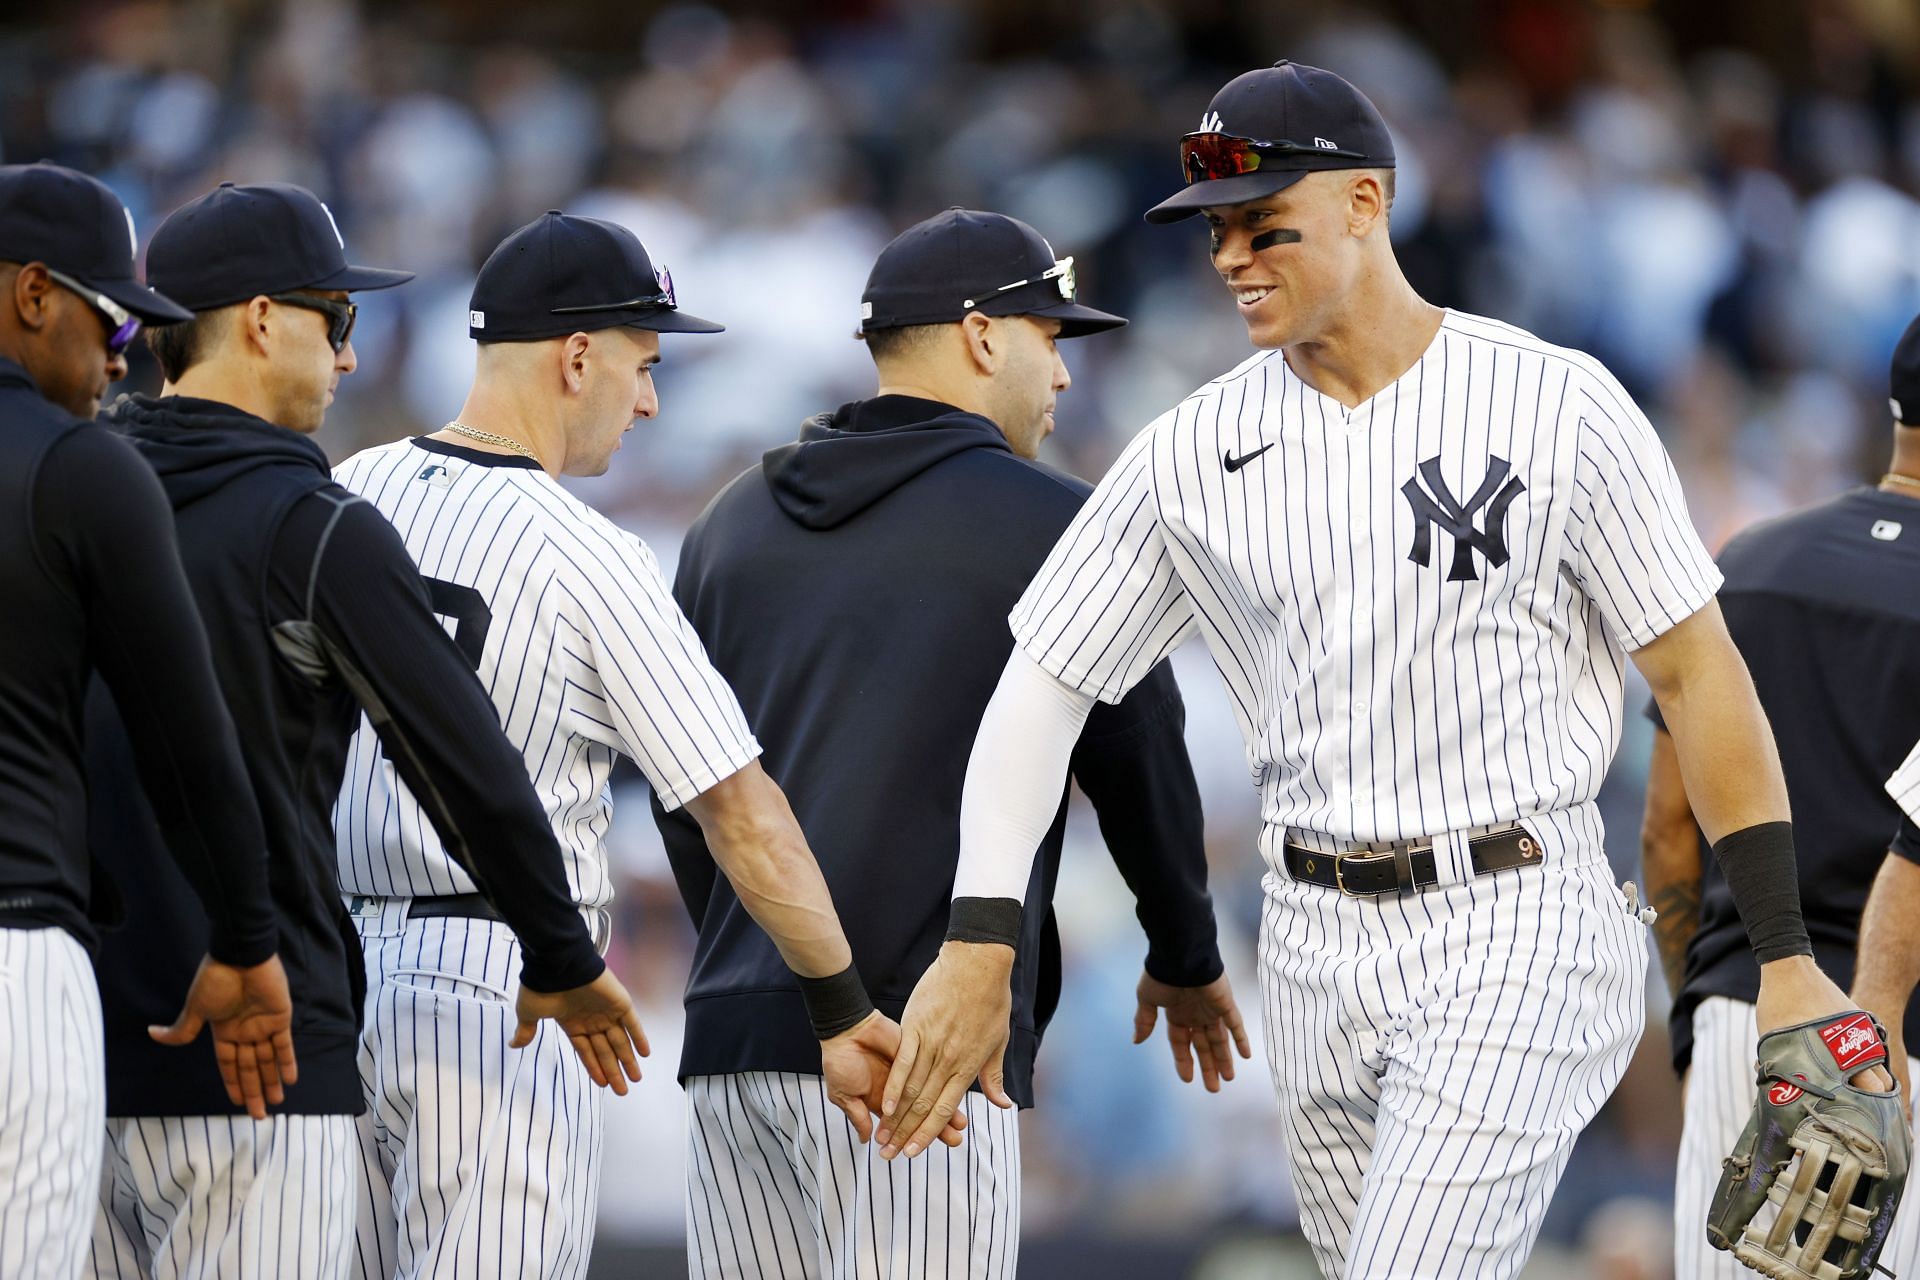 “Getting hot at the perfect time” “Nice job from the hitter today”: New York Yankees fans dare to dream again as six straight wins reinvigorate postseason aspirations